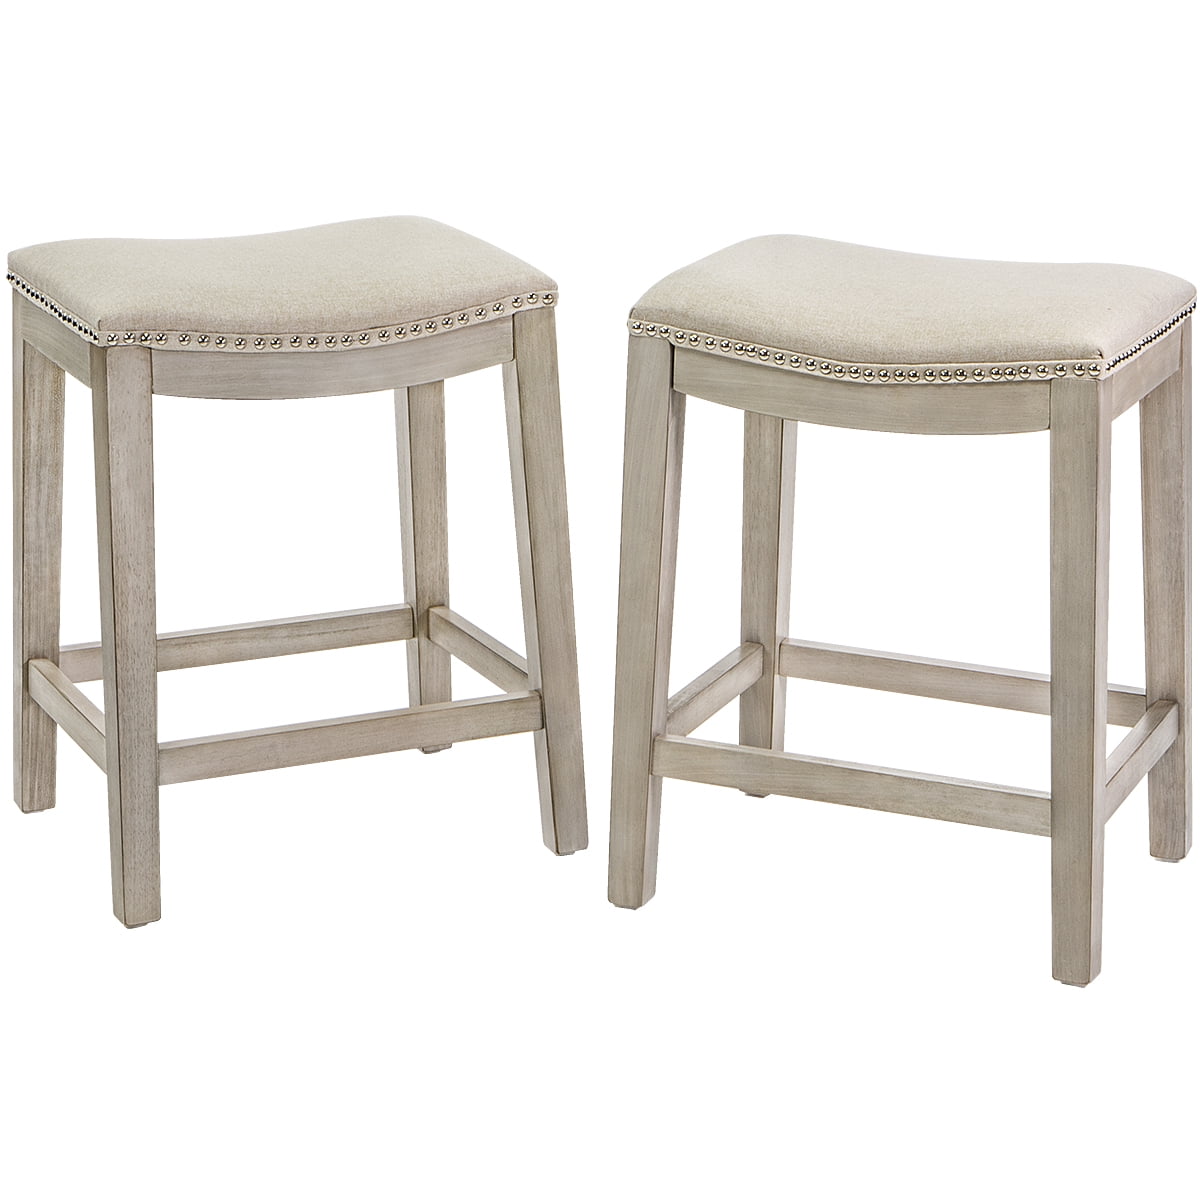 Back Counter Bar Stool Chair Set, Images Of Bar Stools With Backs